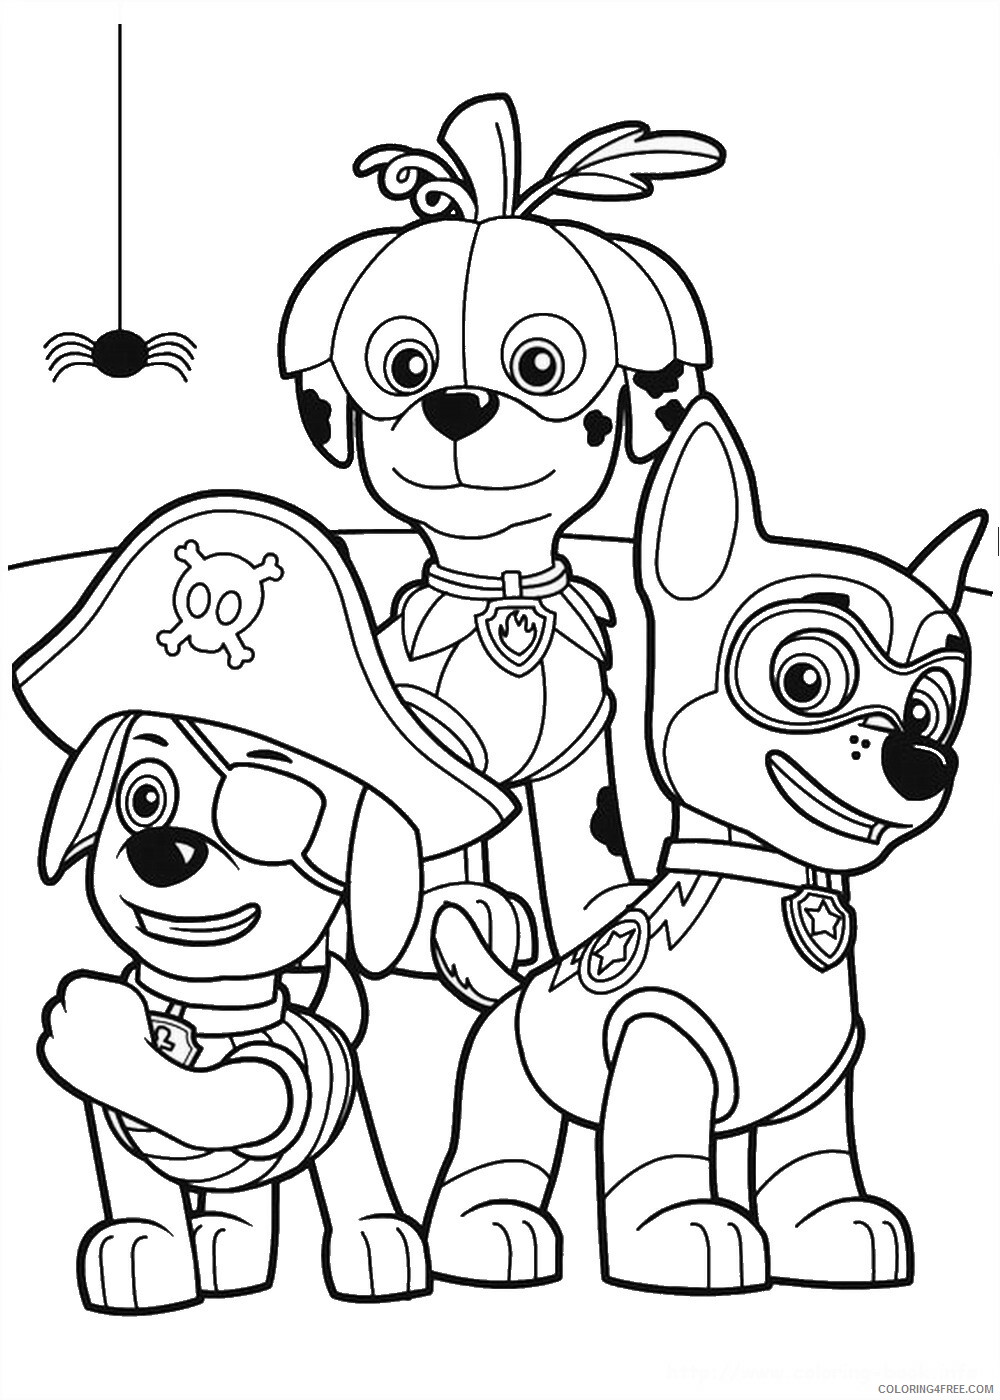 Paw Patrol Coloring Pages TV Film Printable 2020 05931 Coloring4free